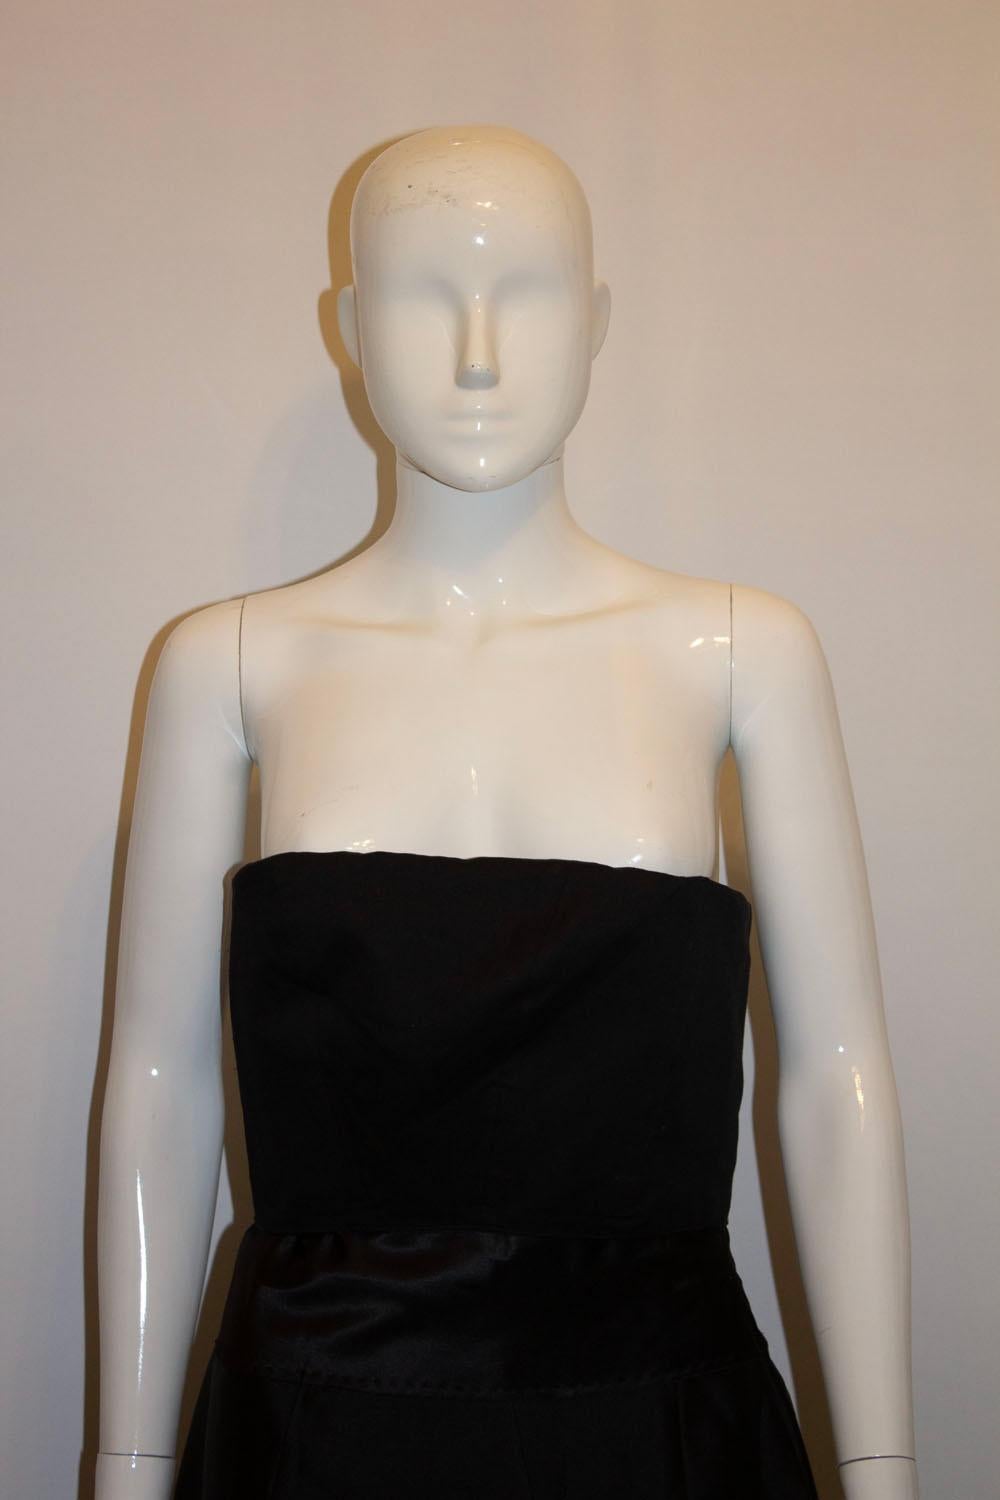 A chic vintage cocktail / dinner dress by Amanda Wakeley main  line. The outerfabric and lining are silk. It has a fold over top , and back central zip, with a pleat at the front. Shoulder straps could easily be added. UK size 12. 
Measurements: